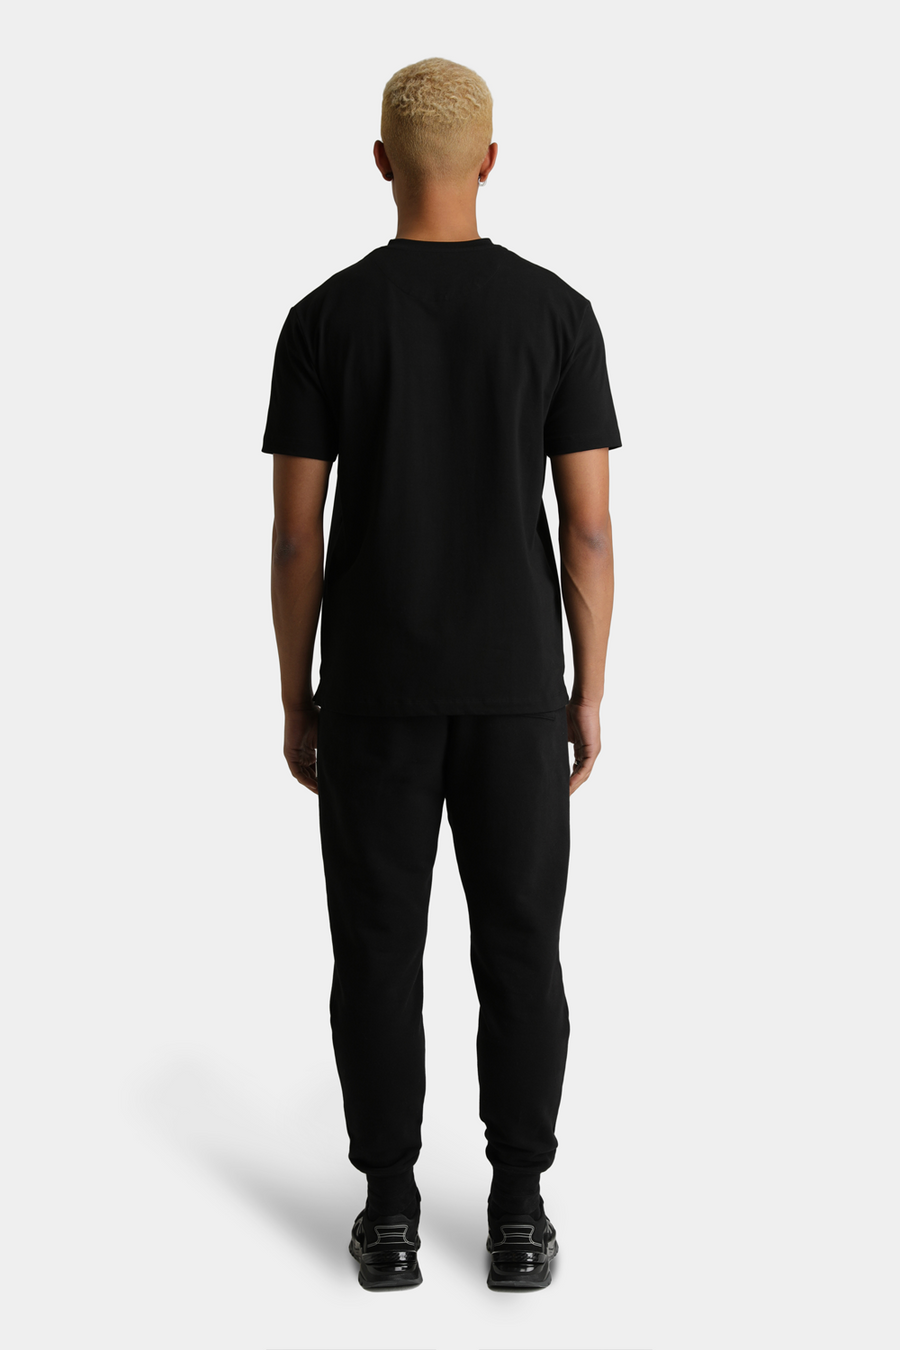 Buy the Android Homme Blur Script T-Shirt in Black at Intro. Spend £50 for free UK delivery. Official stockists. We ship worldwide.